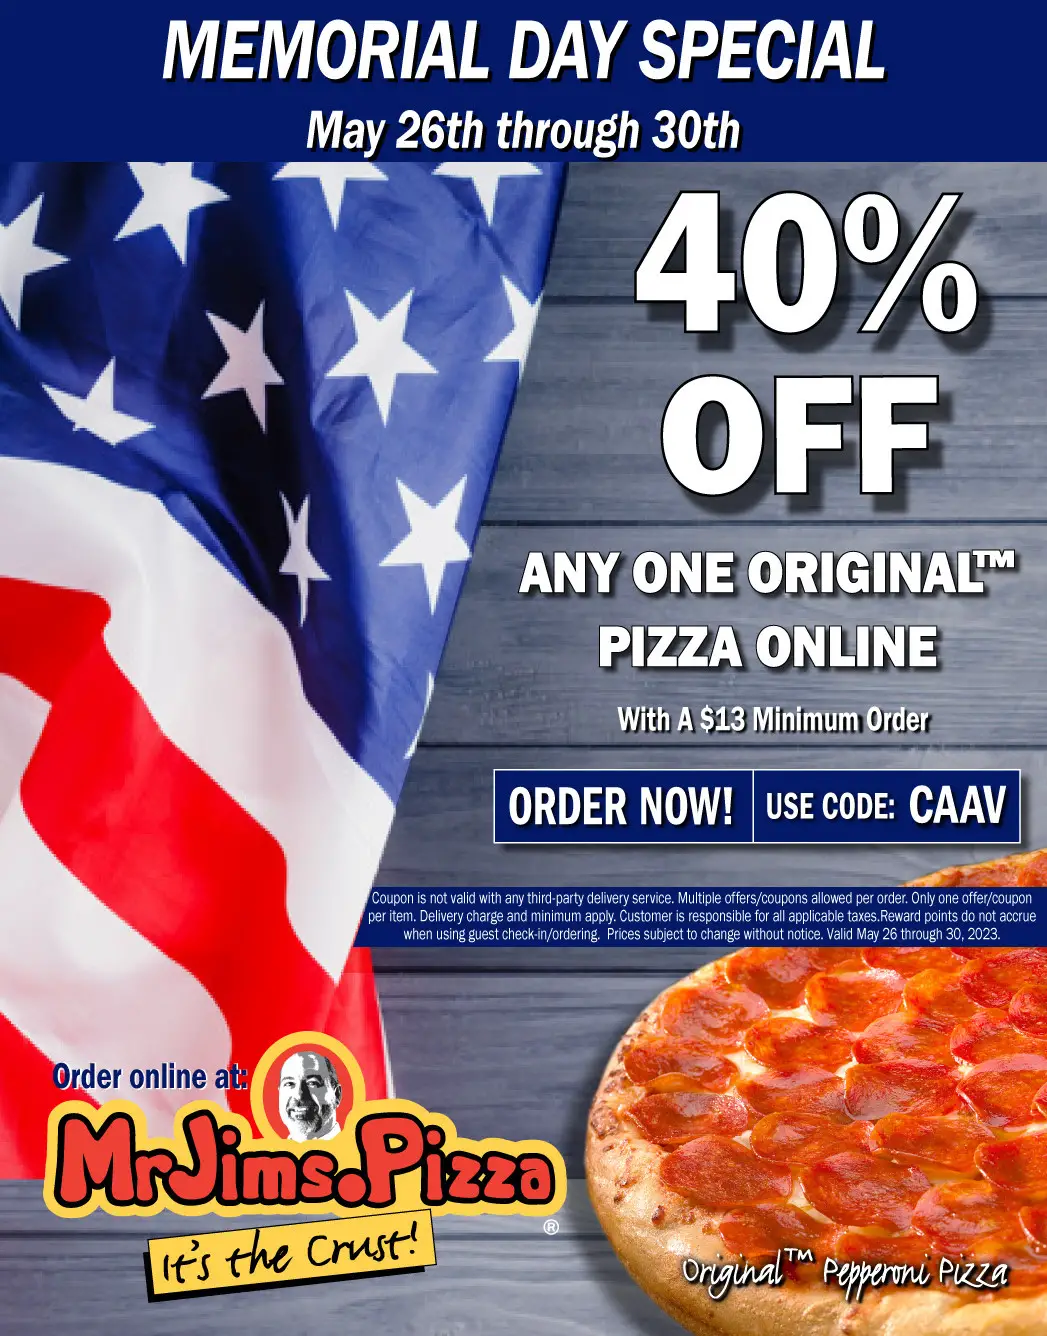 Mr. Jim's Pizza Memorial Day [Memorial Day] 40% Off Any One Original Pizza Online